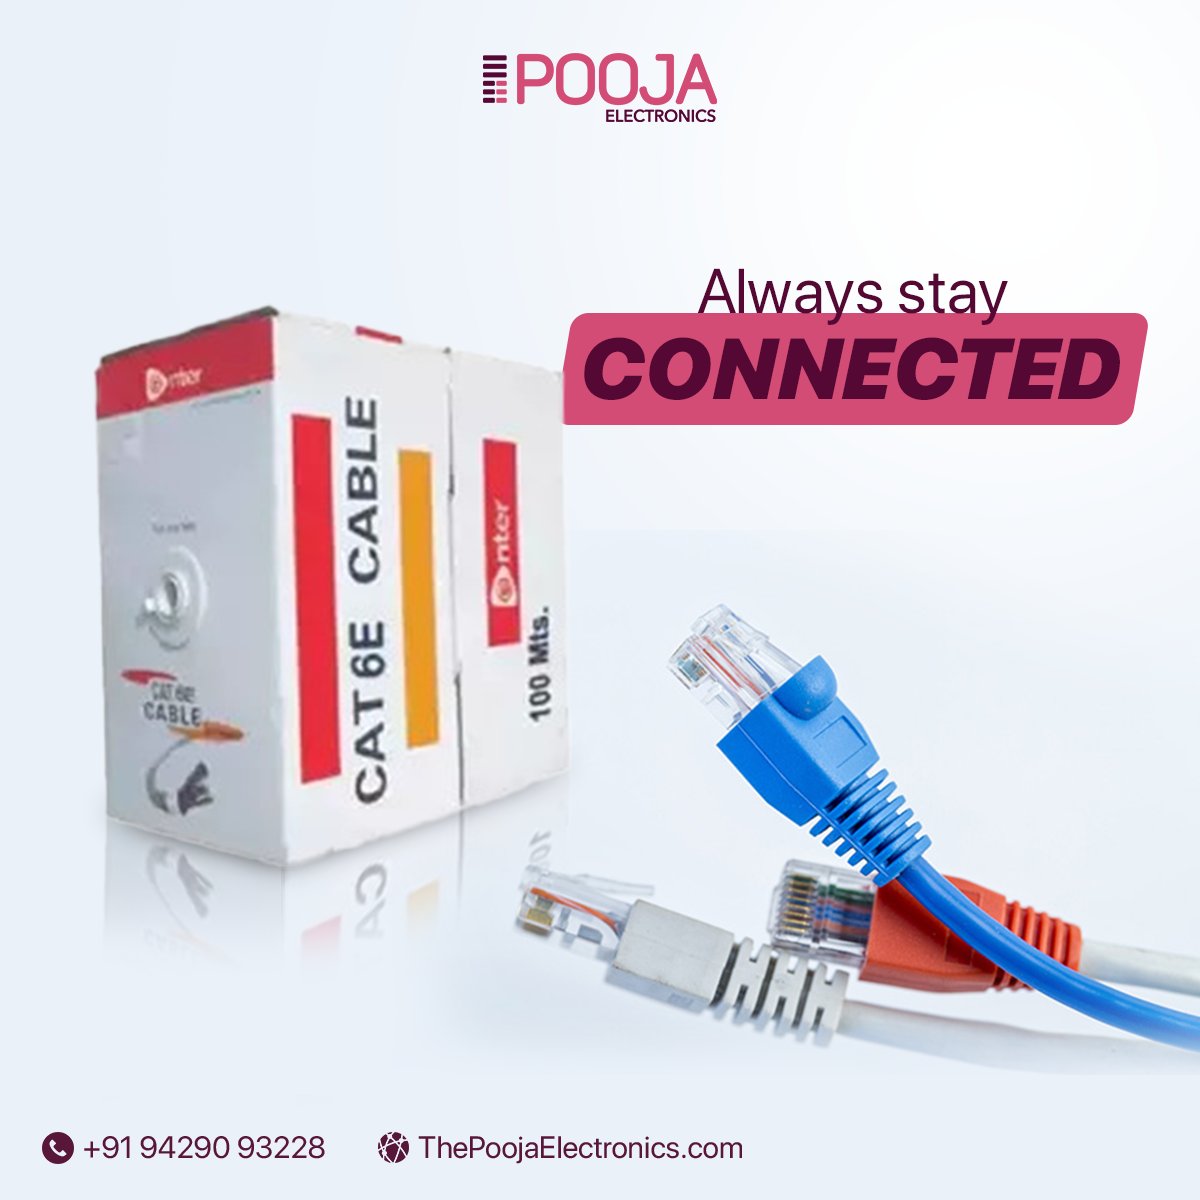 Now you don't need to suffer from the connectivity issues while you are having our premium quality cable CAT6E.
.
#poojaelectronics #cat6e #electronicitems #ExpertRepairs #WeFixItAll #ElectricalSafety #TrustedRepairs #qualityservice #ElectronicsSpecialist #AffordableRepairs